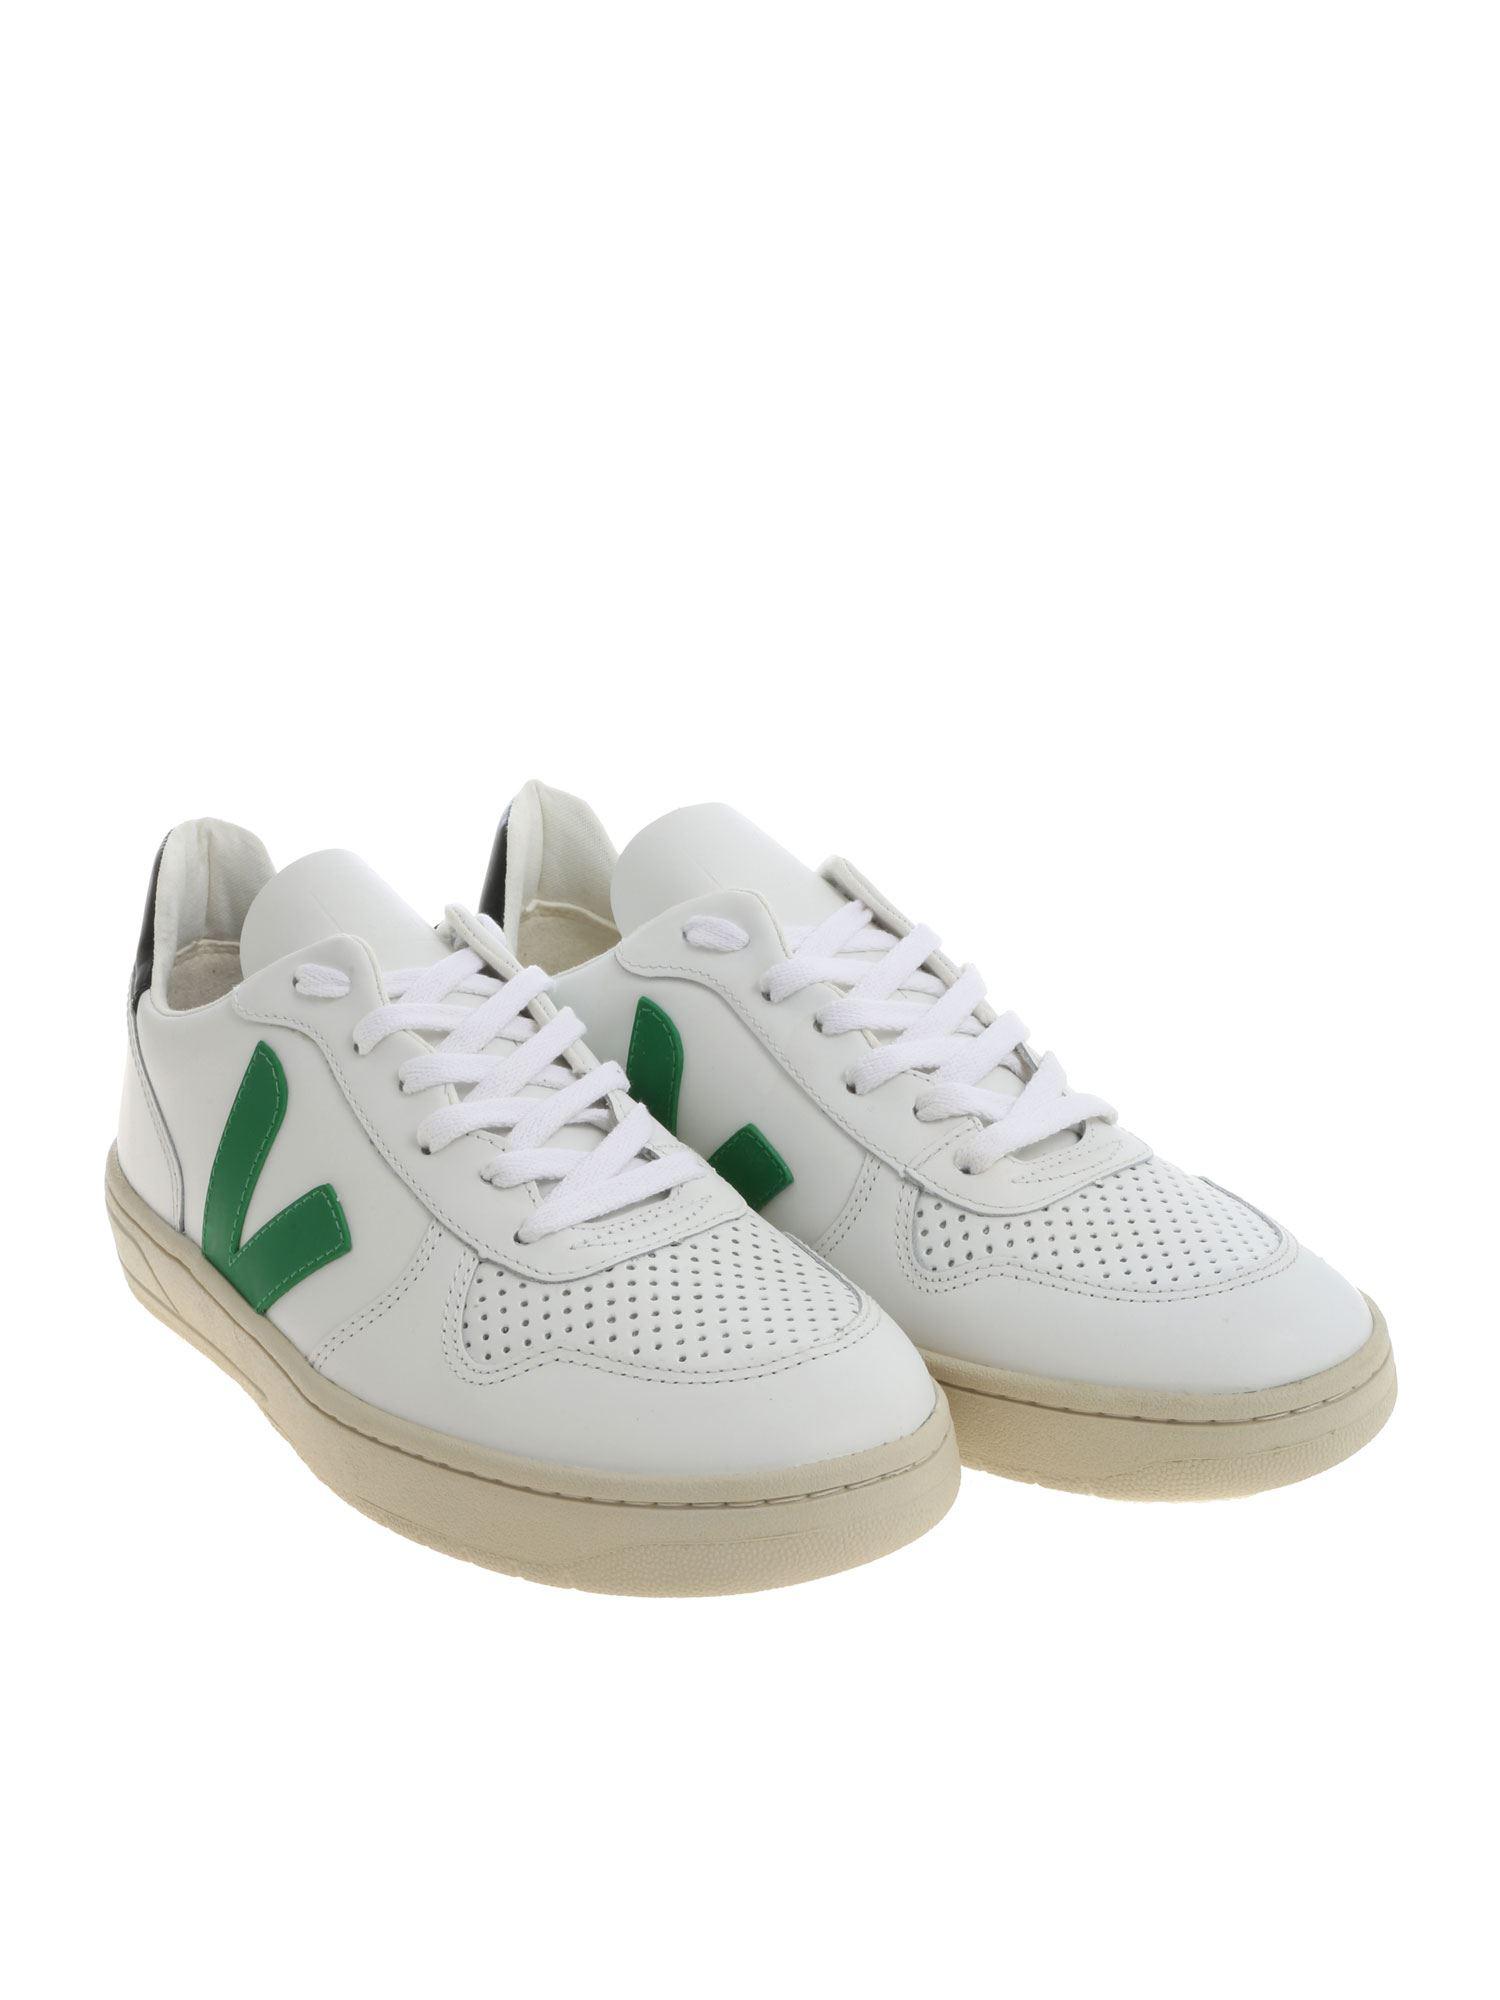 Veja Leather White And Green \